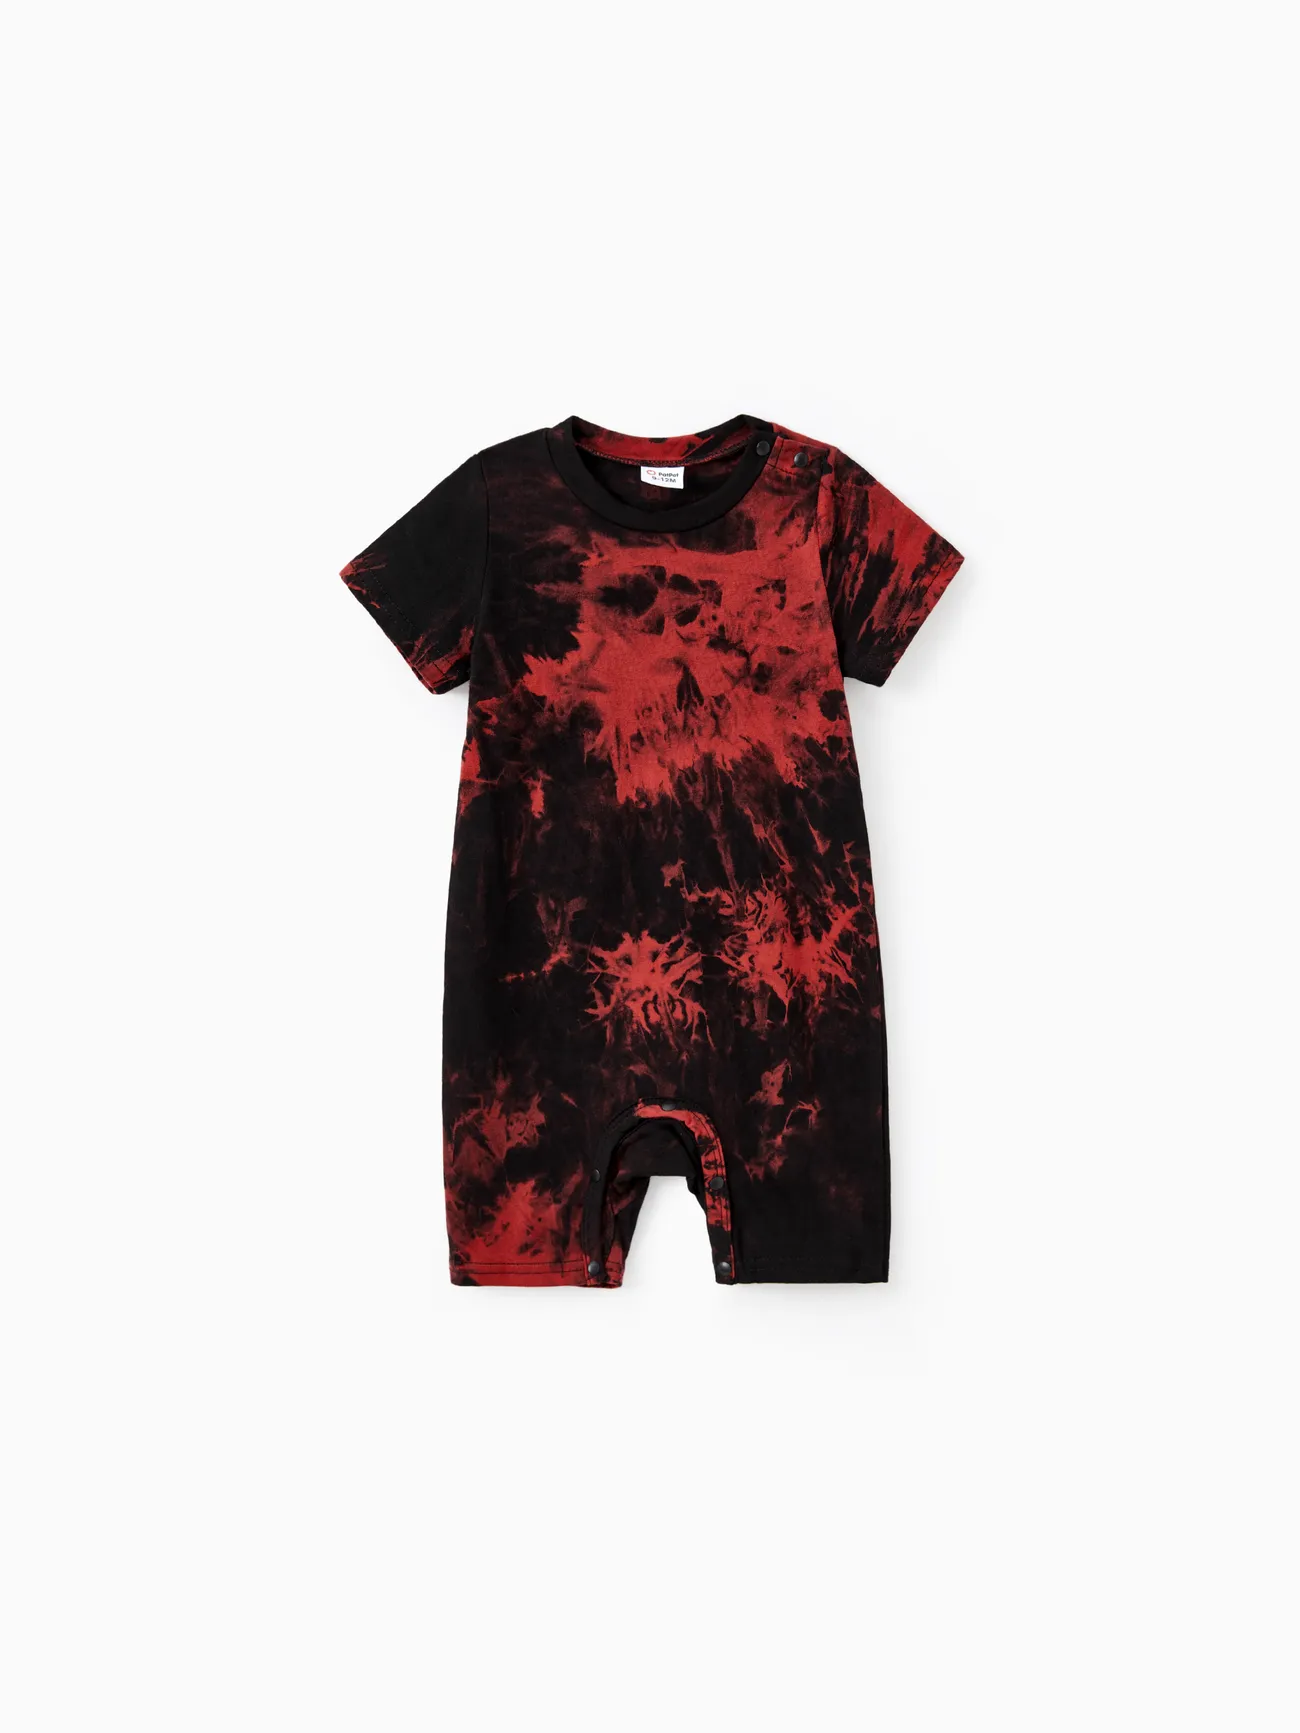 Family Tie-Dyed Cotton Casual Romper with Snaps redblack big image 1